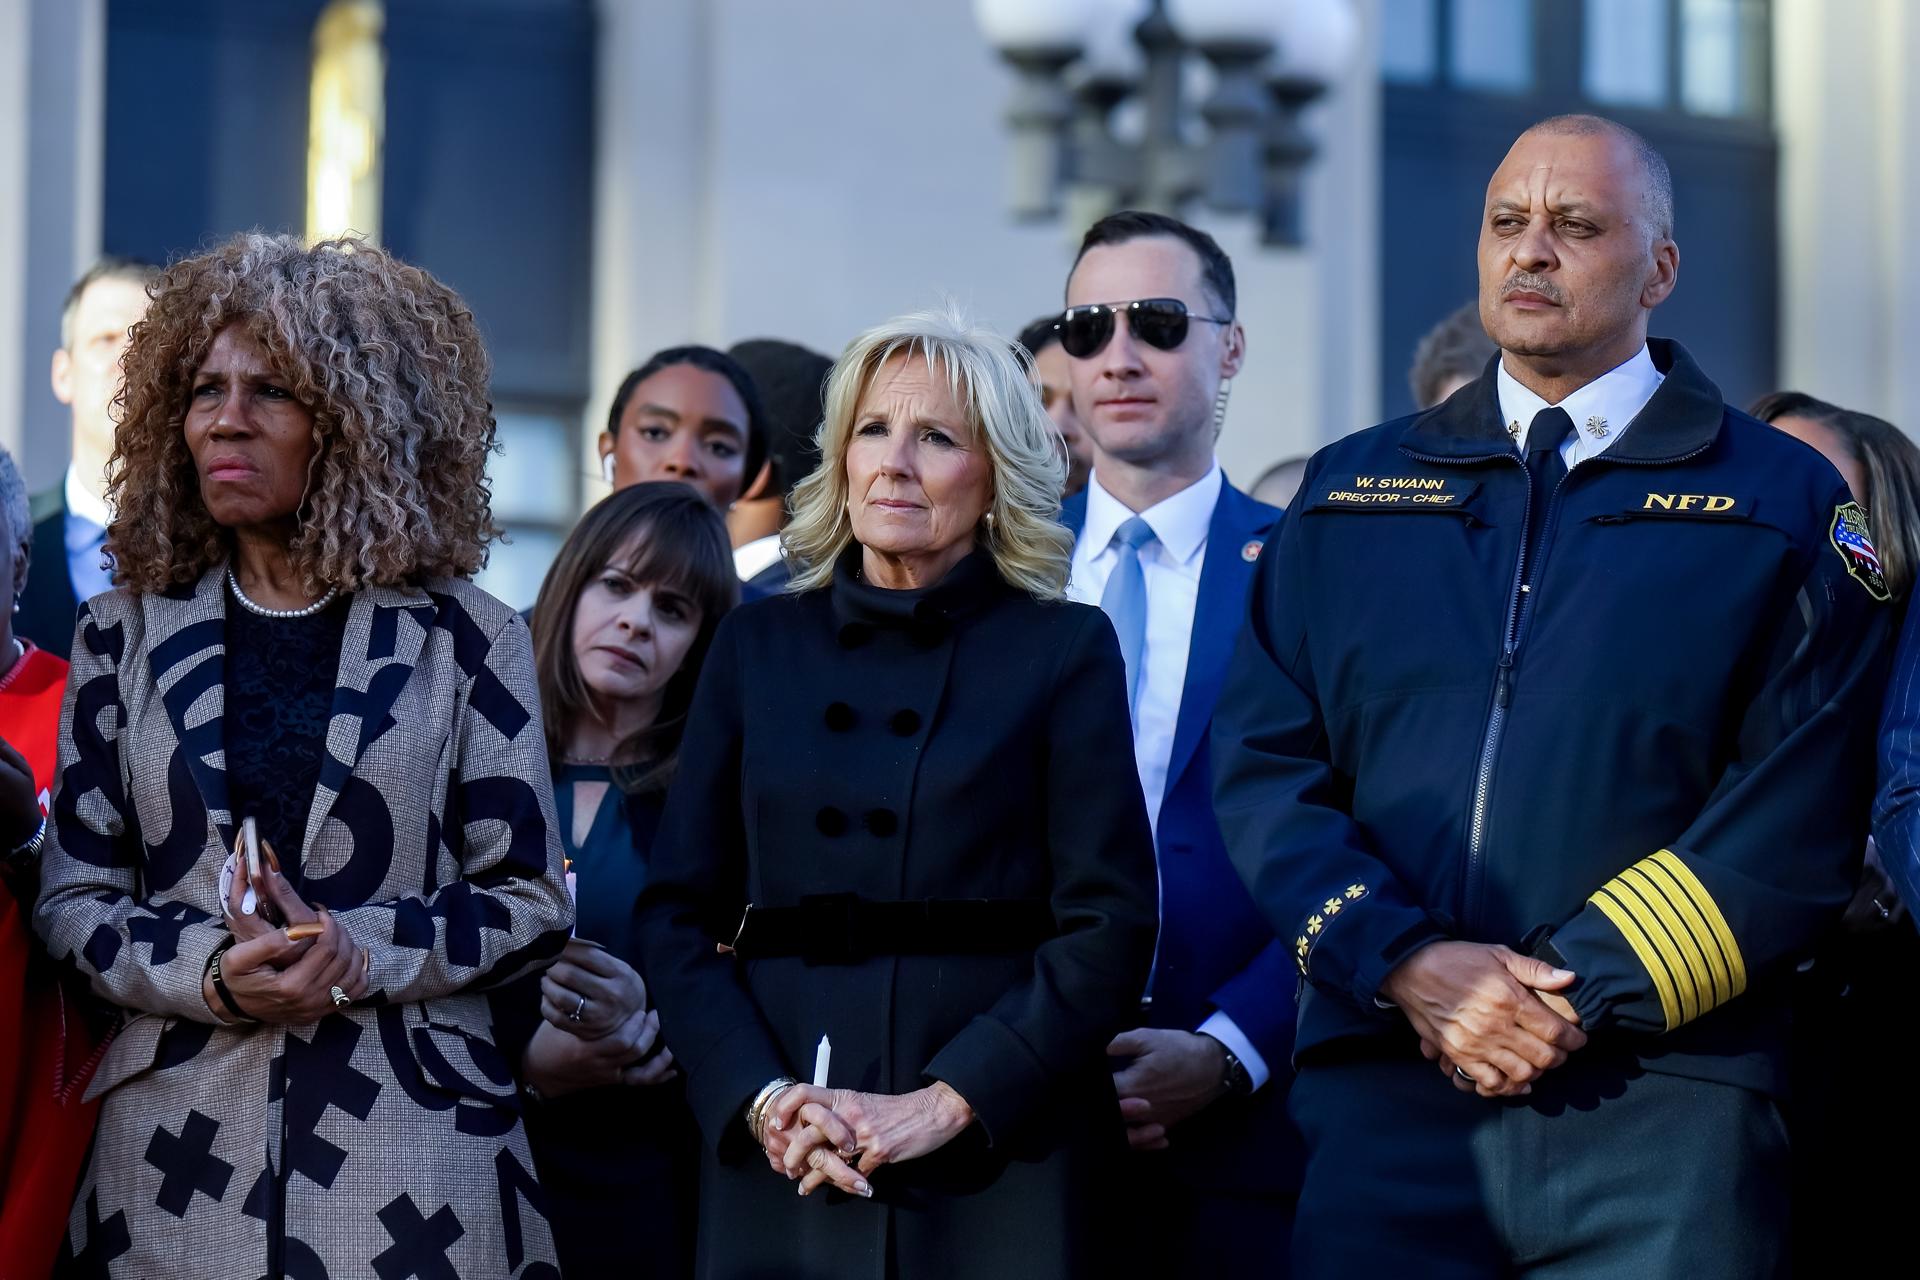 US First Lady Jill Biden (C) and Nashville Emergency Management Director Chief William Swann (R) attend a memorial vigil for the victims of the Covenant Presbyterian Church school shooting in Nashville, Tennessee, USA, 29 March 2023. EFE-EPA/JUSTIN RENFROE